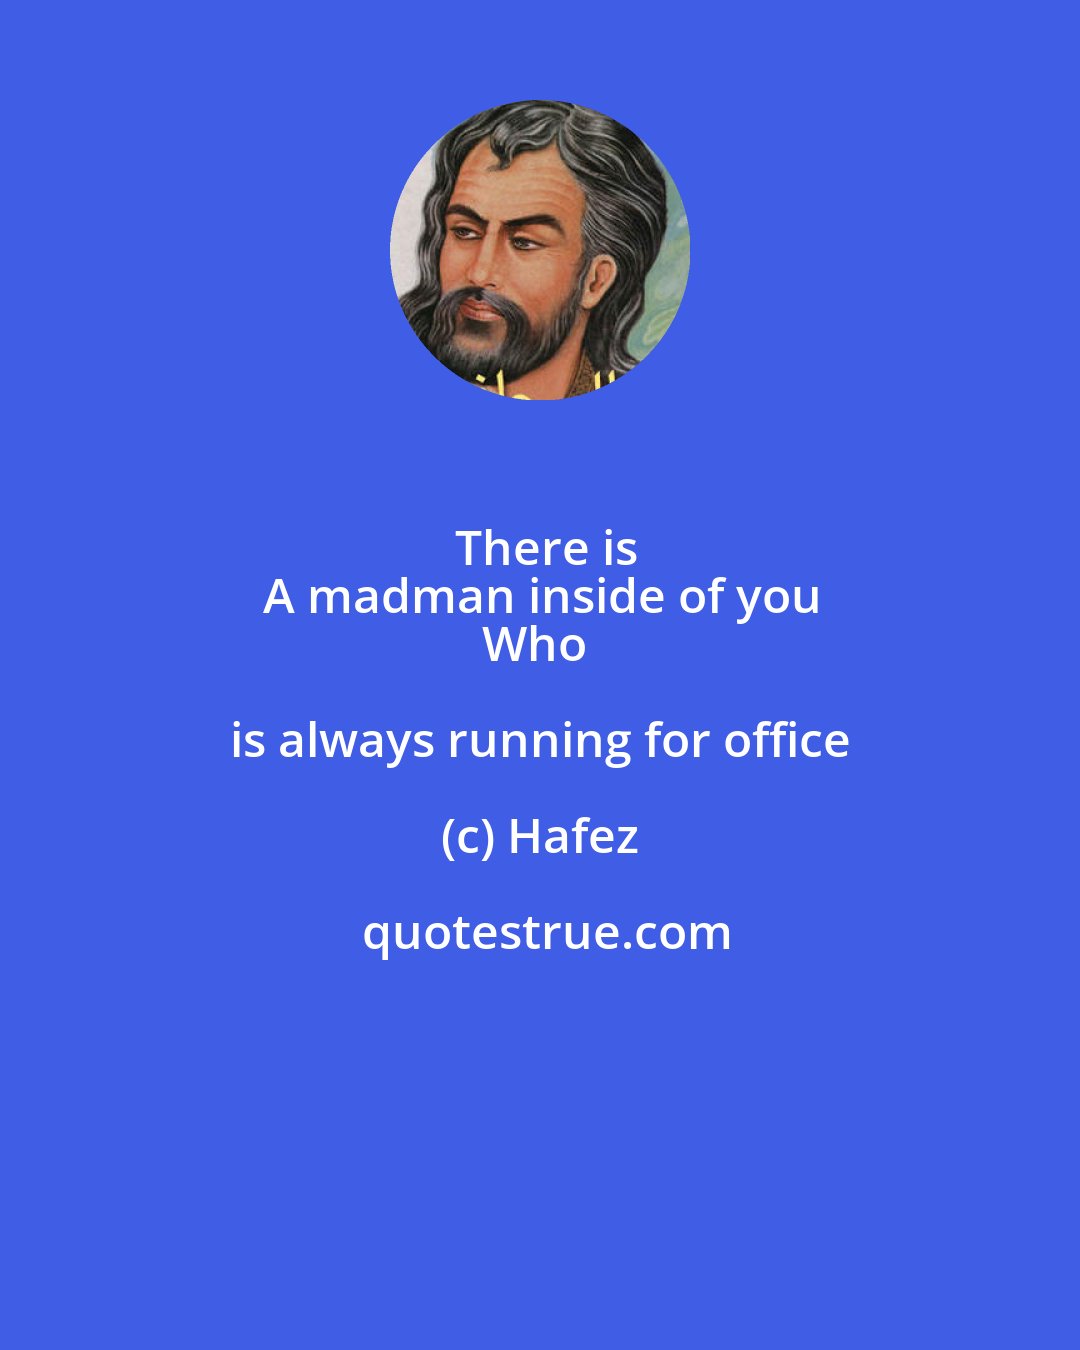 Hafez: There is
A madman inside of you
Who is always running for office